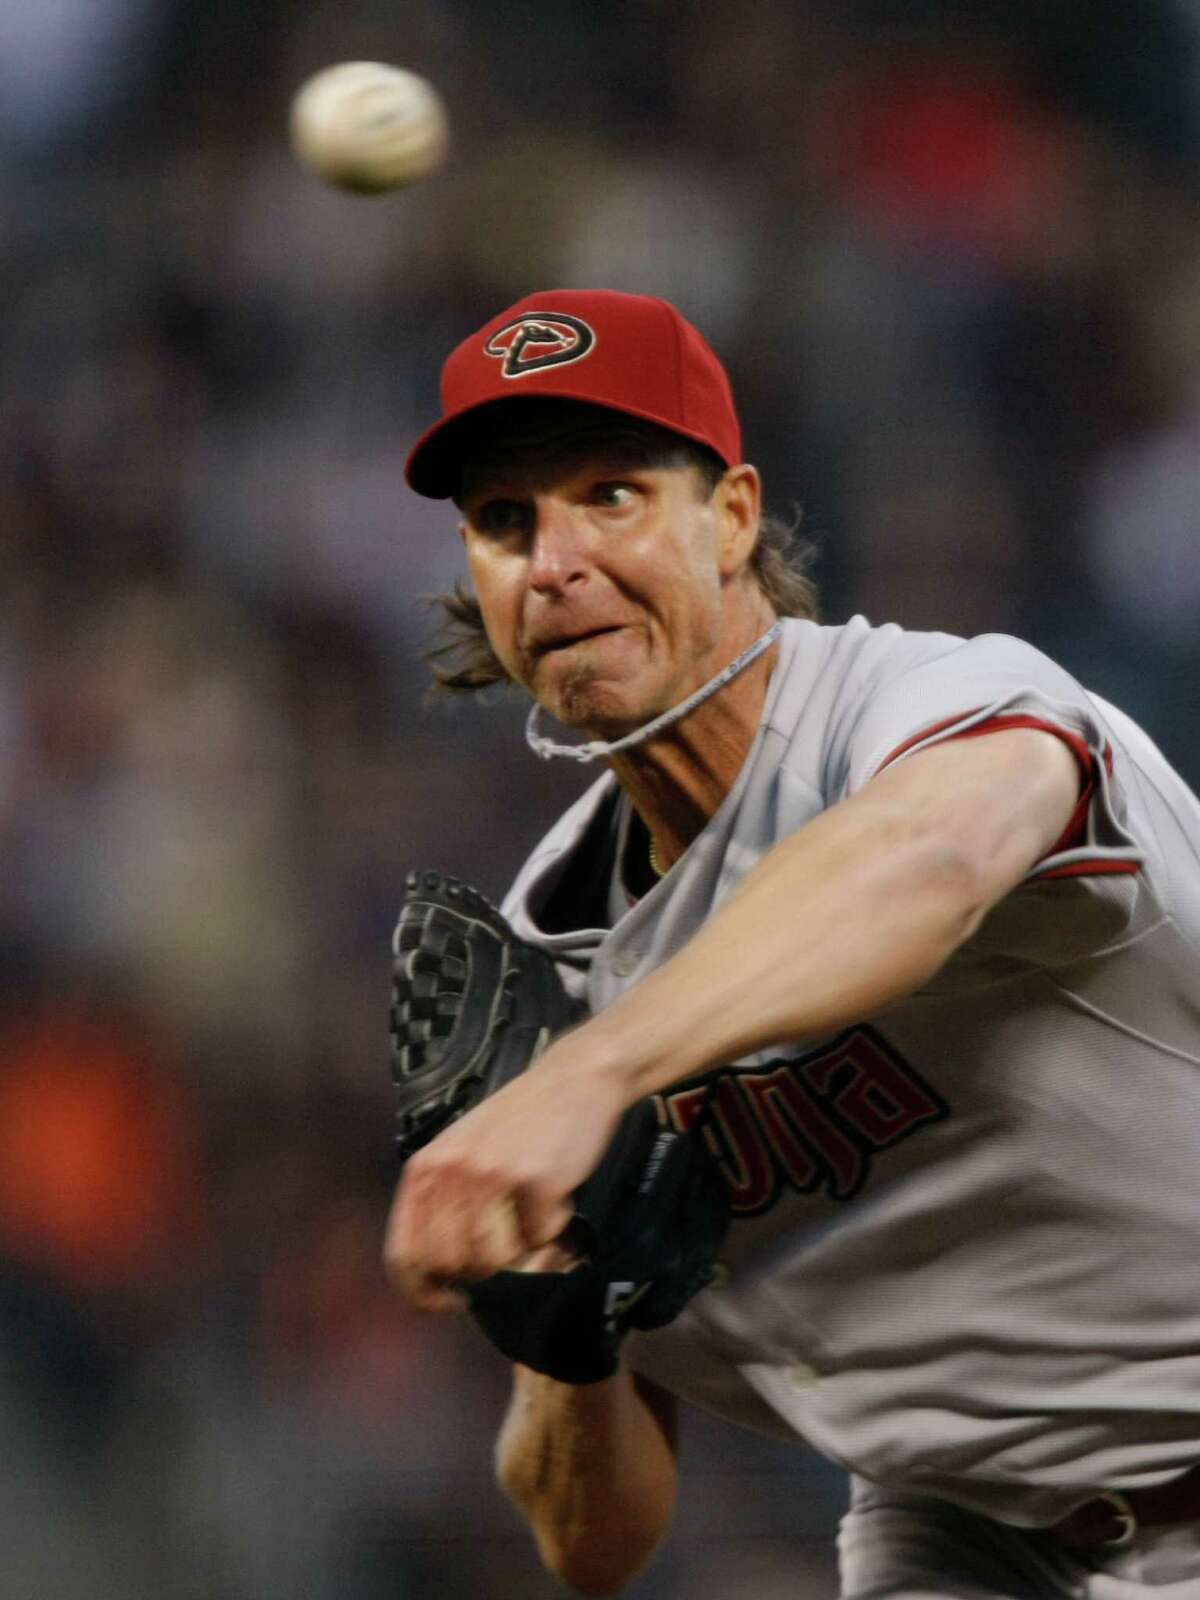 Randy Johnson had his best seasons with the Diamondbacks before finishing with the Giants.